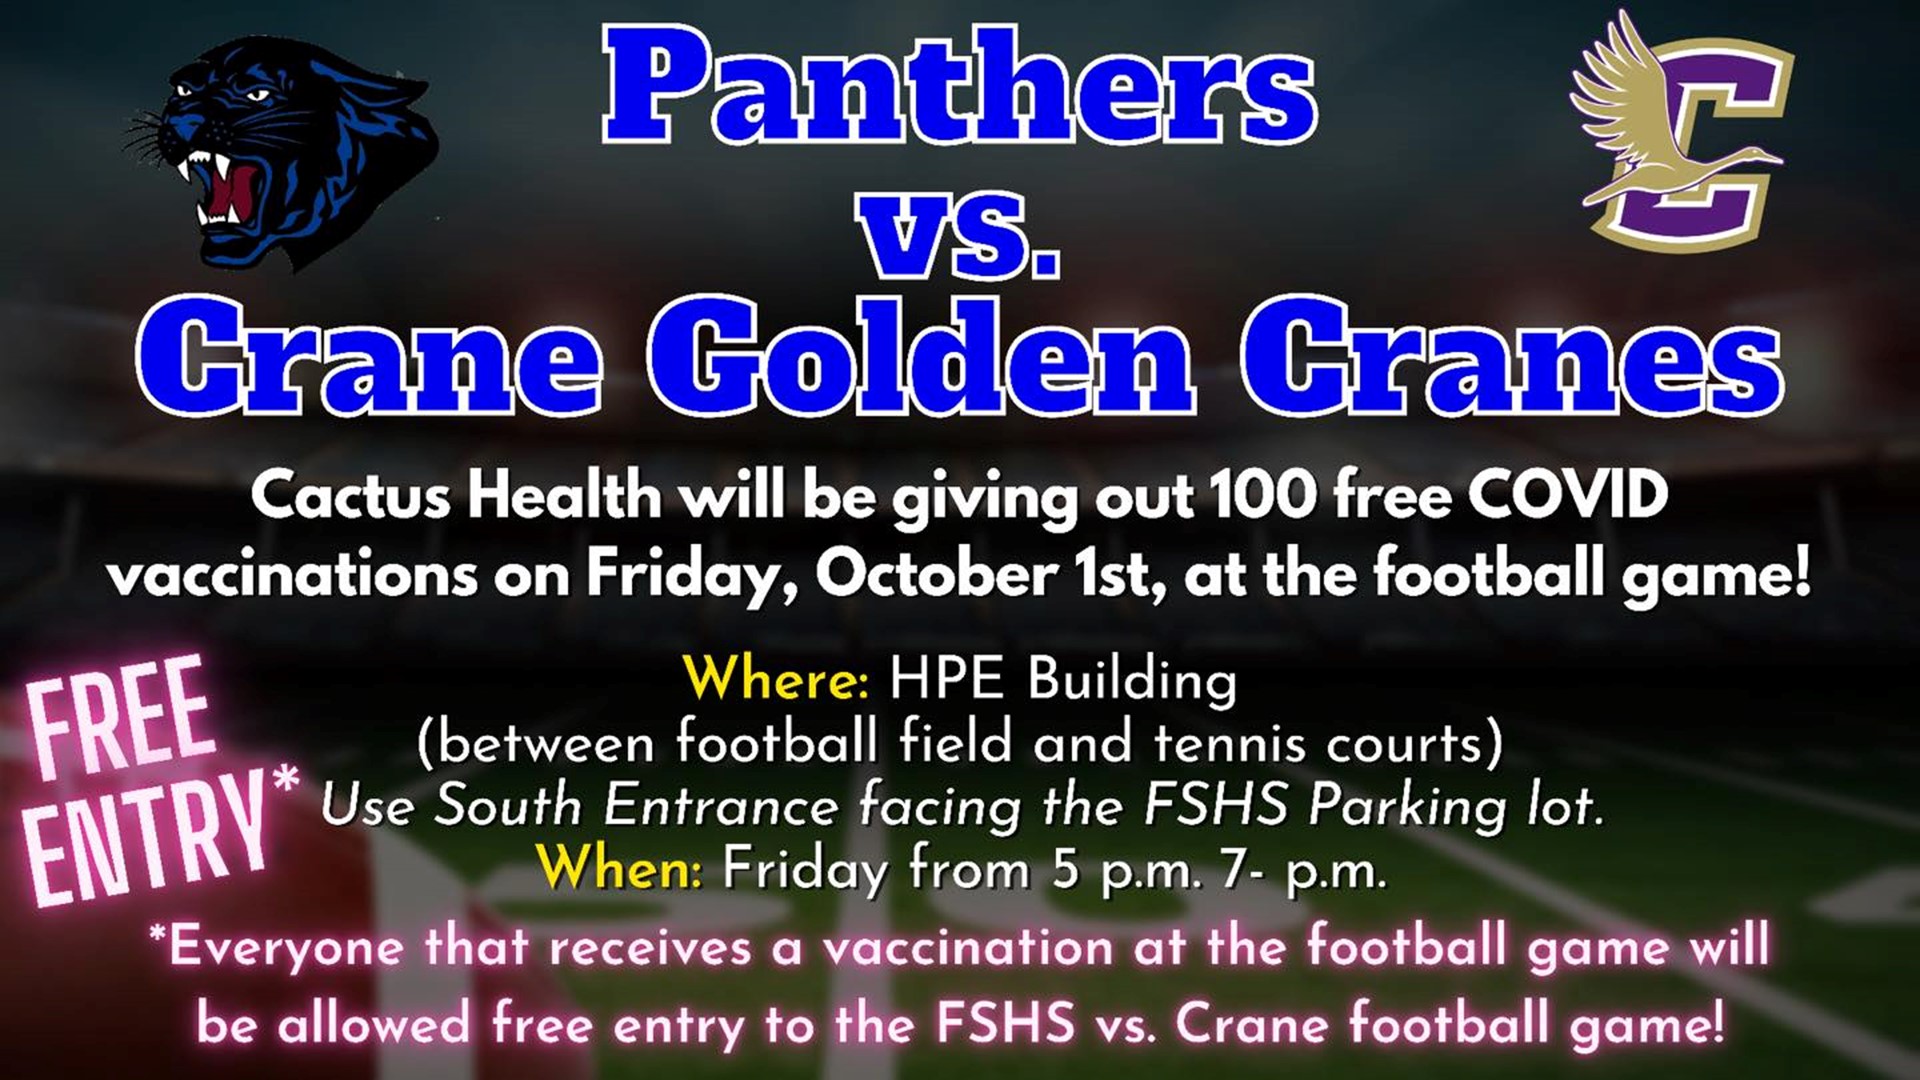 Those who receive a shot at the football game Friday will be allowed free entry into the game.